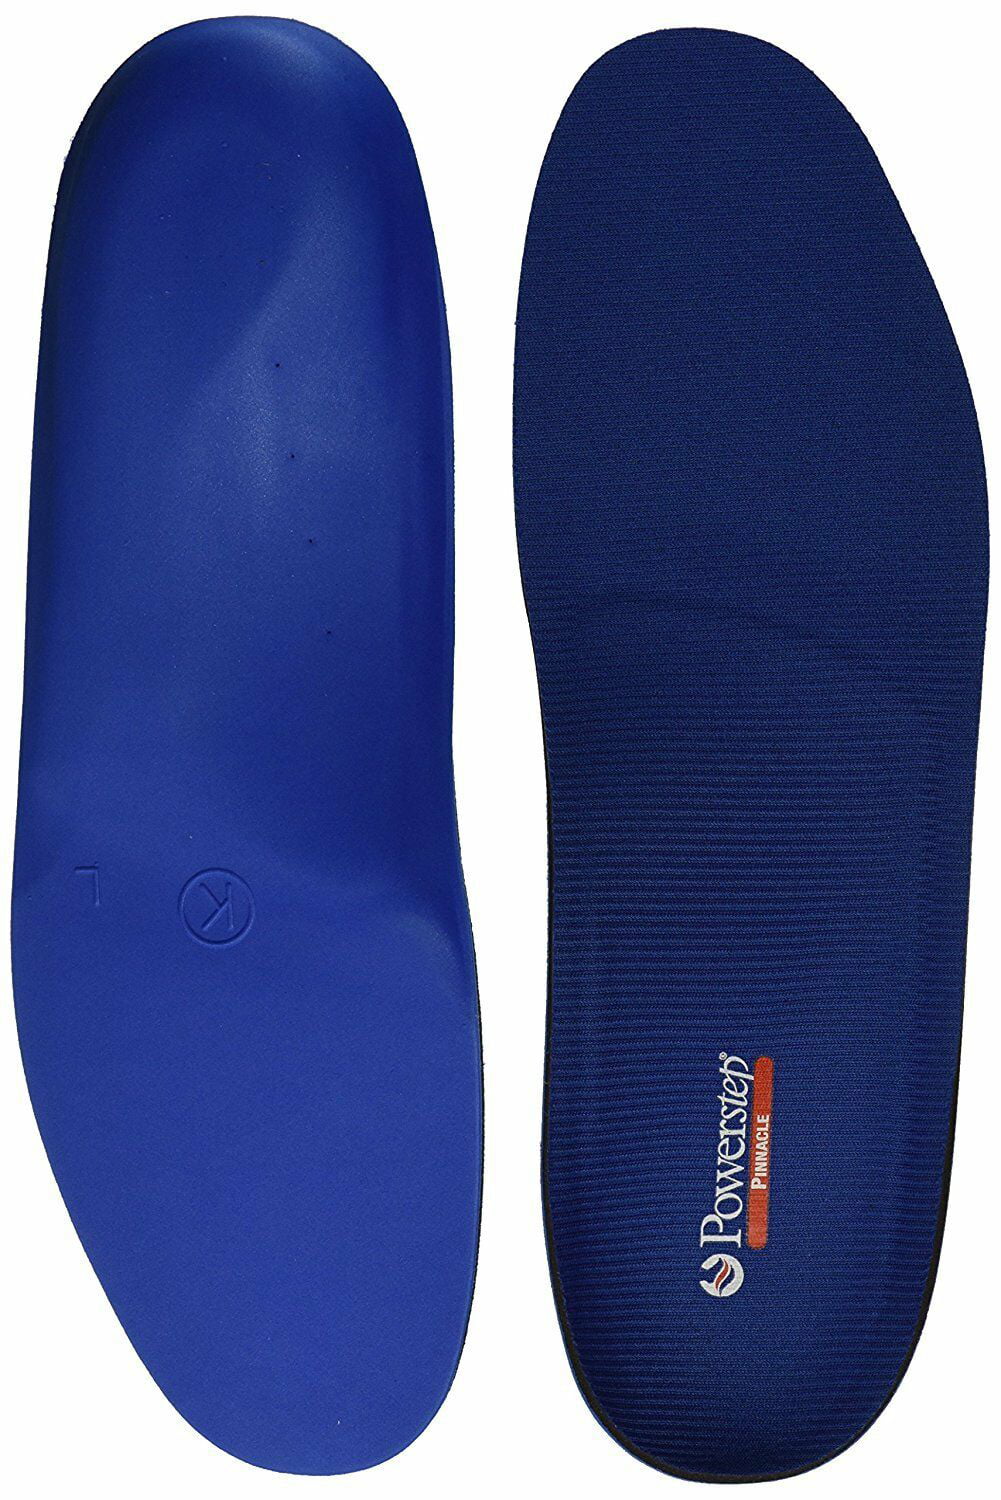 Click Footwear Thermal Shock Absorbing Foams Insole For MENS All Sizes